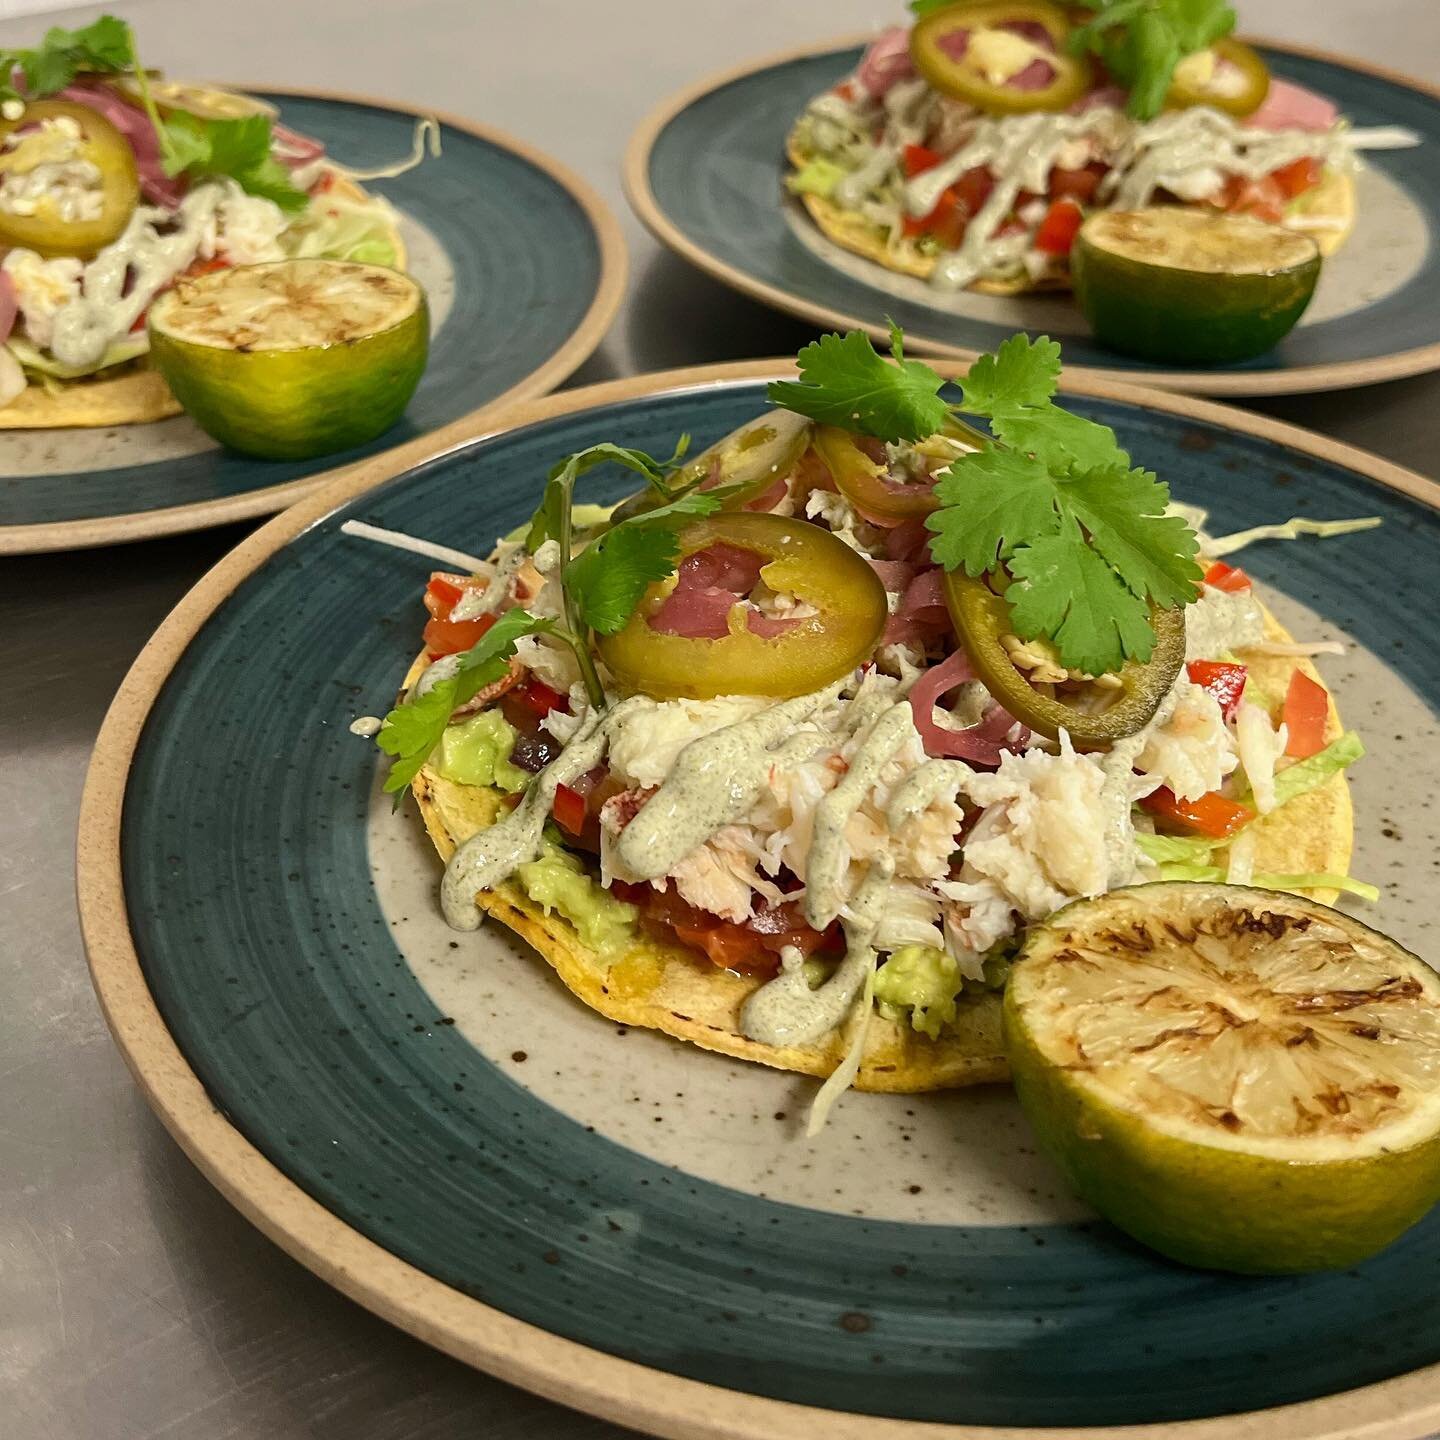 You might need a pineapple margarita for this! Tostada feature: Dungeness crab, smashed avocado, pico, charred scallion, pickled jalape&ntilde;os, pickled red onion, crisp corn tortilla.
Happy Friday!
.⁣
#fridayvibes #tostado #margaritas #dungenesscr